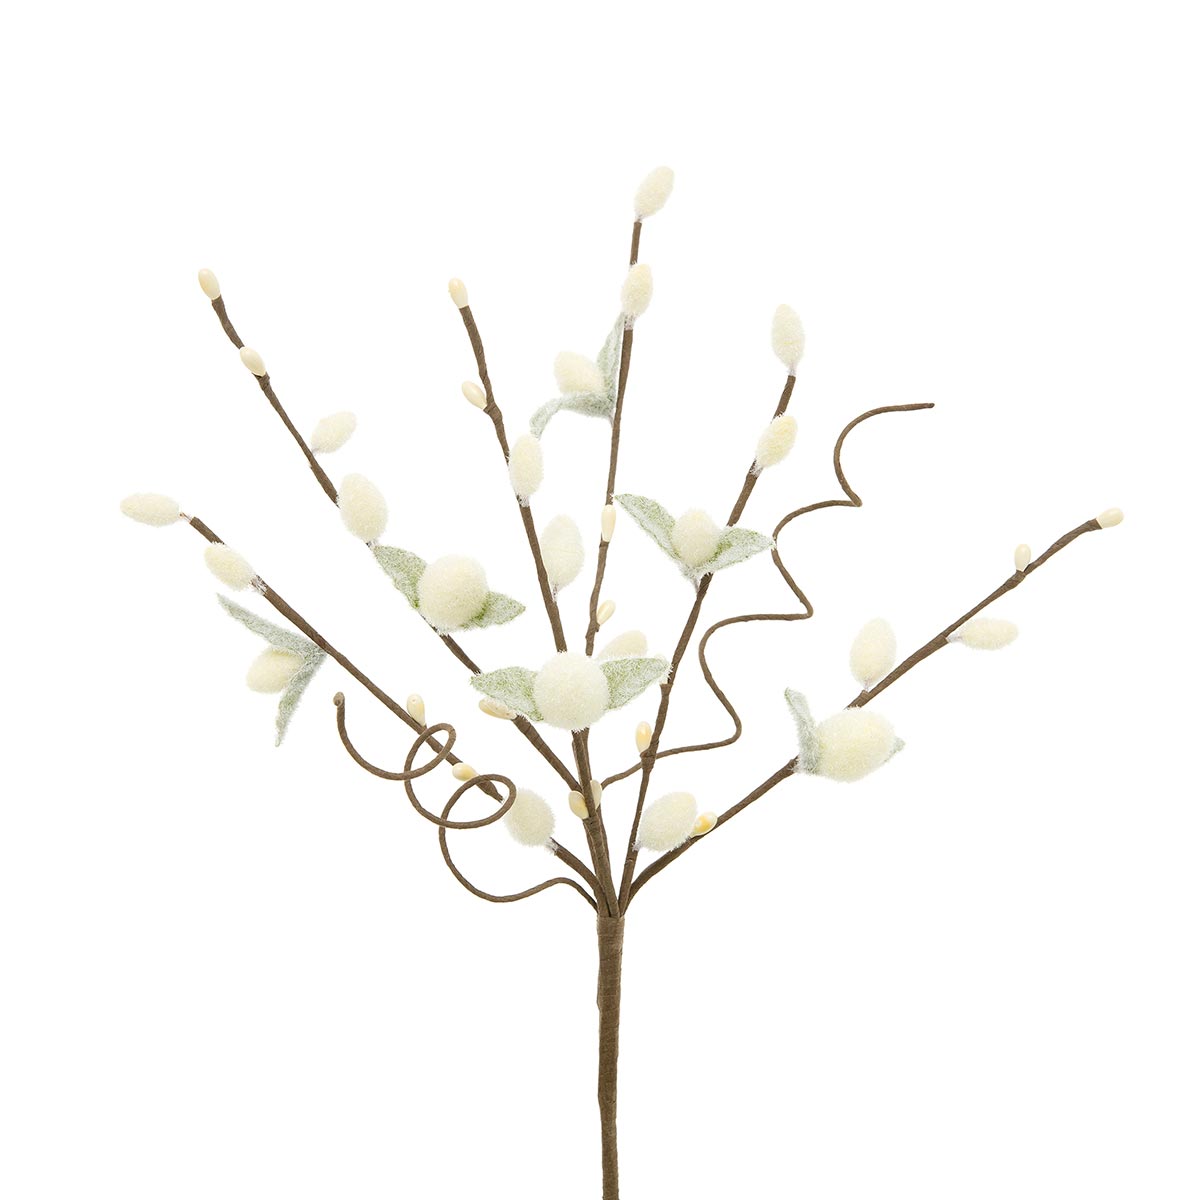 PUSSY WILLOW MINI PIK WITH WHITE PIP BERRIES 6"X12"